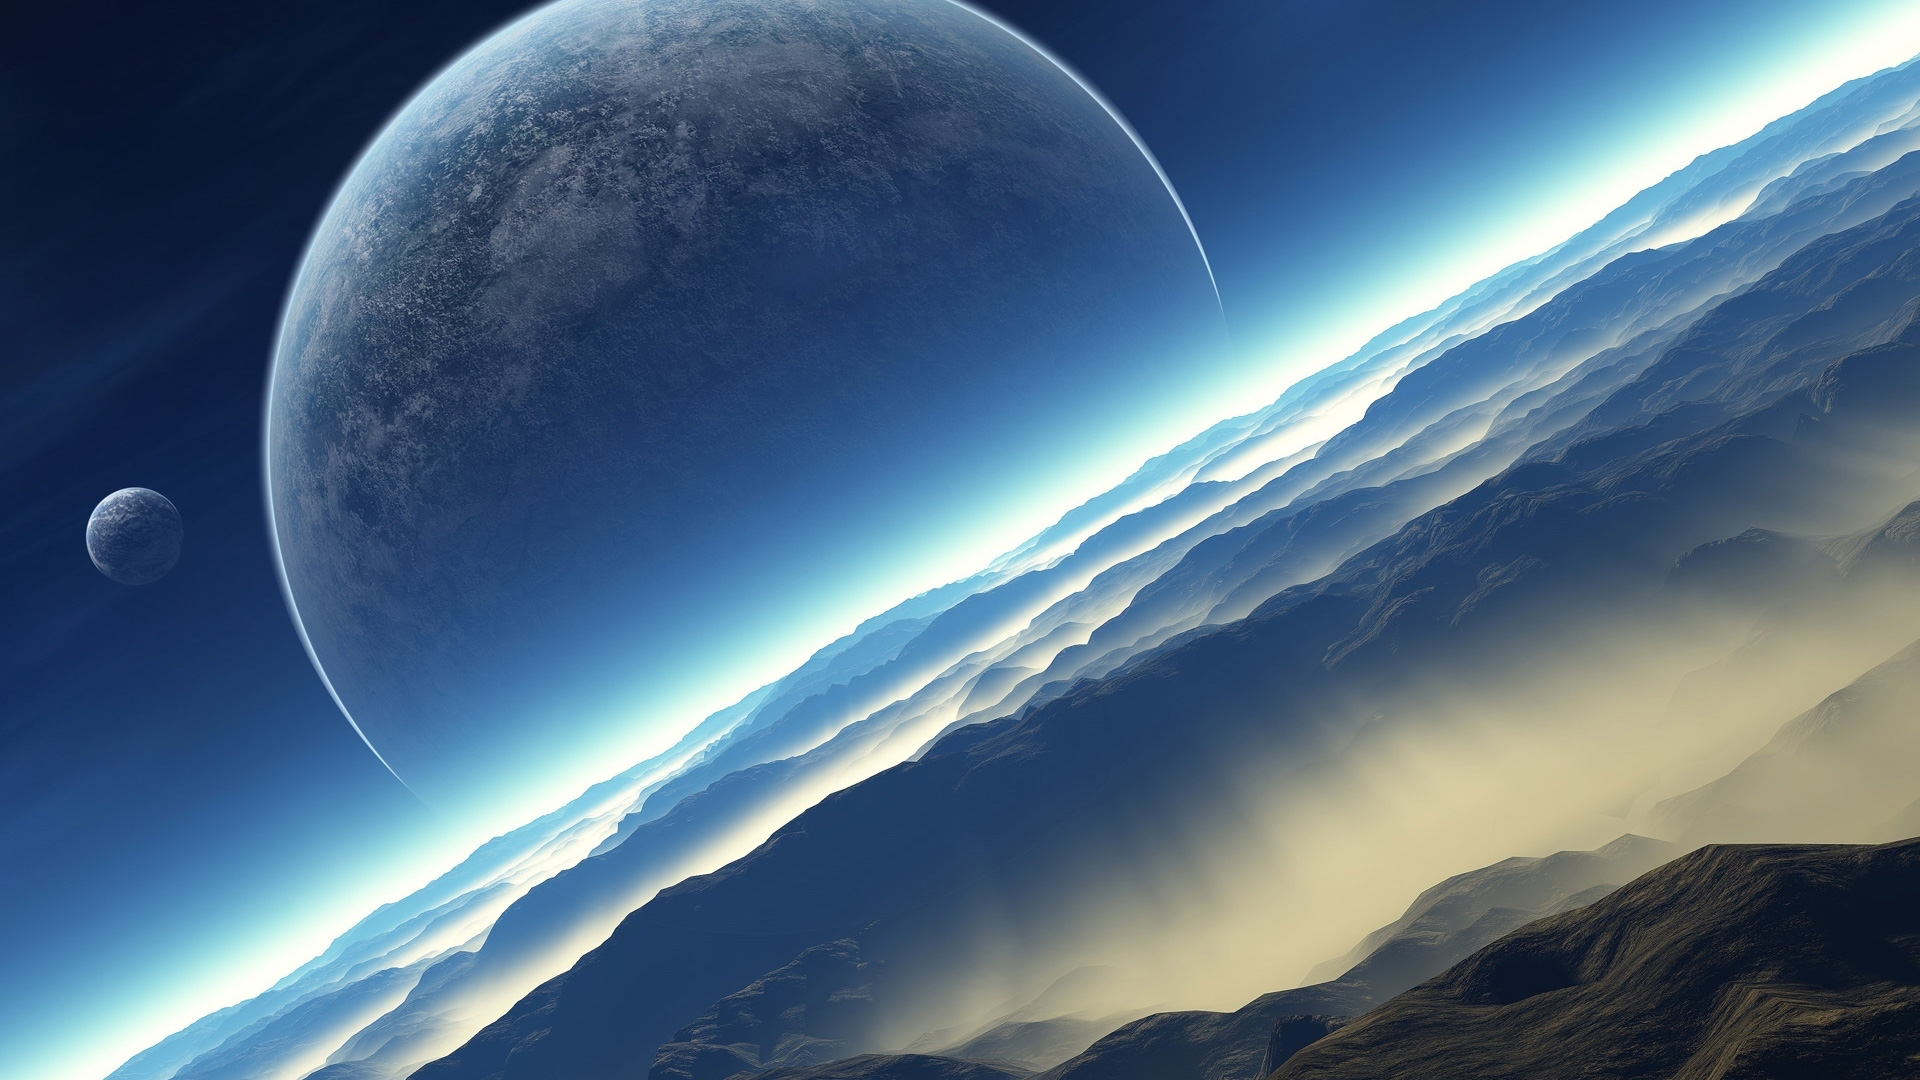 Download High Definition Space Wallpaper FULL HD 1080p 1920x1080